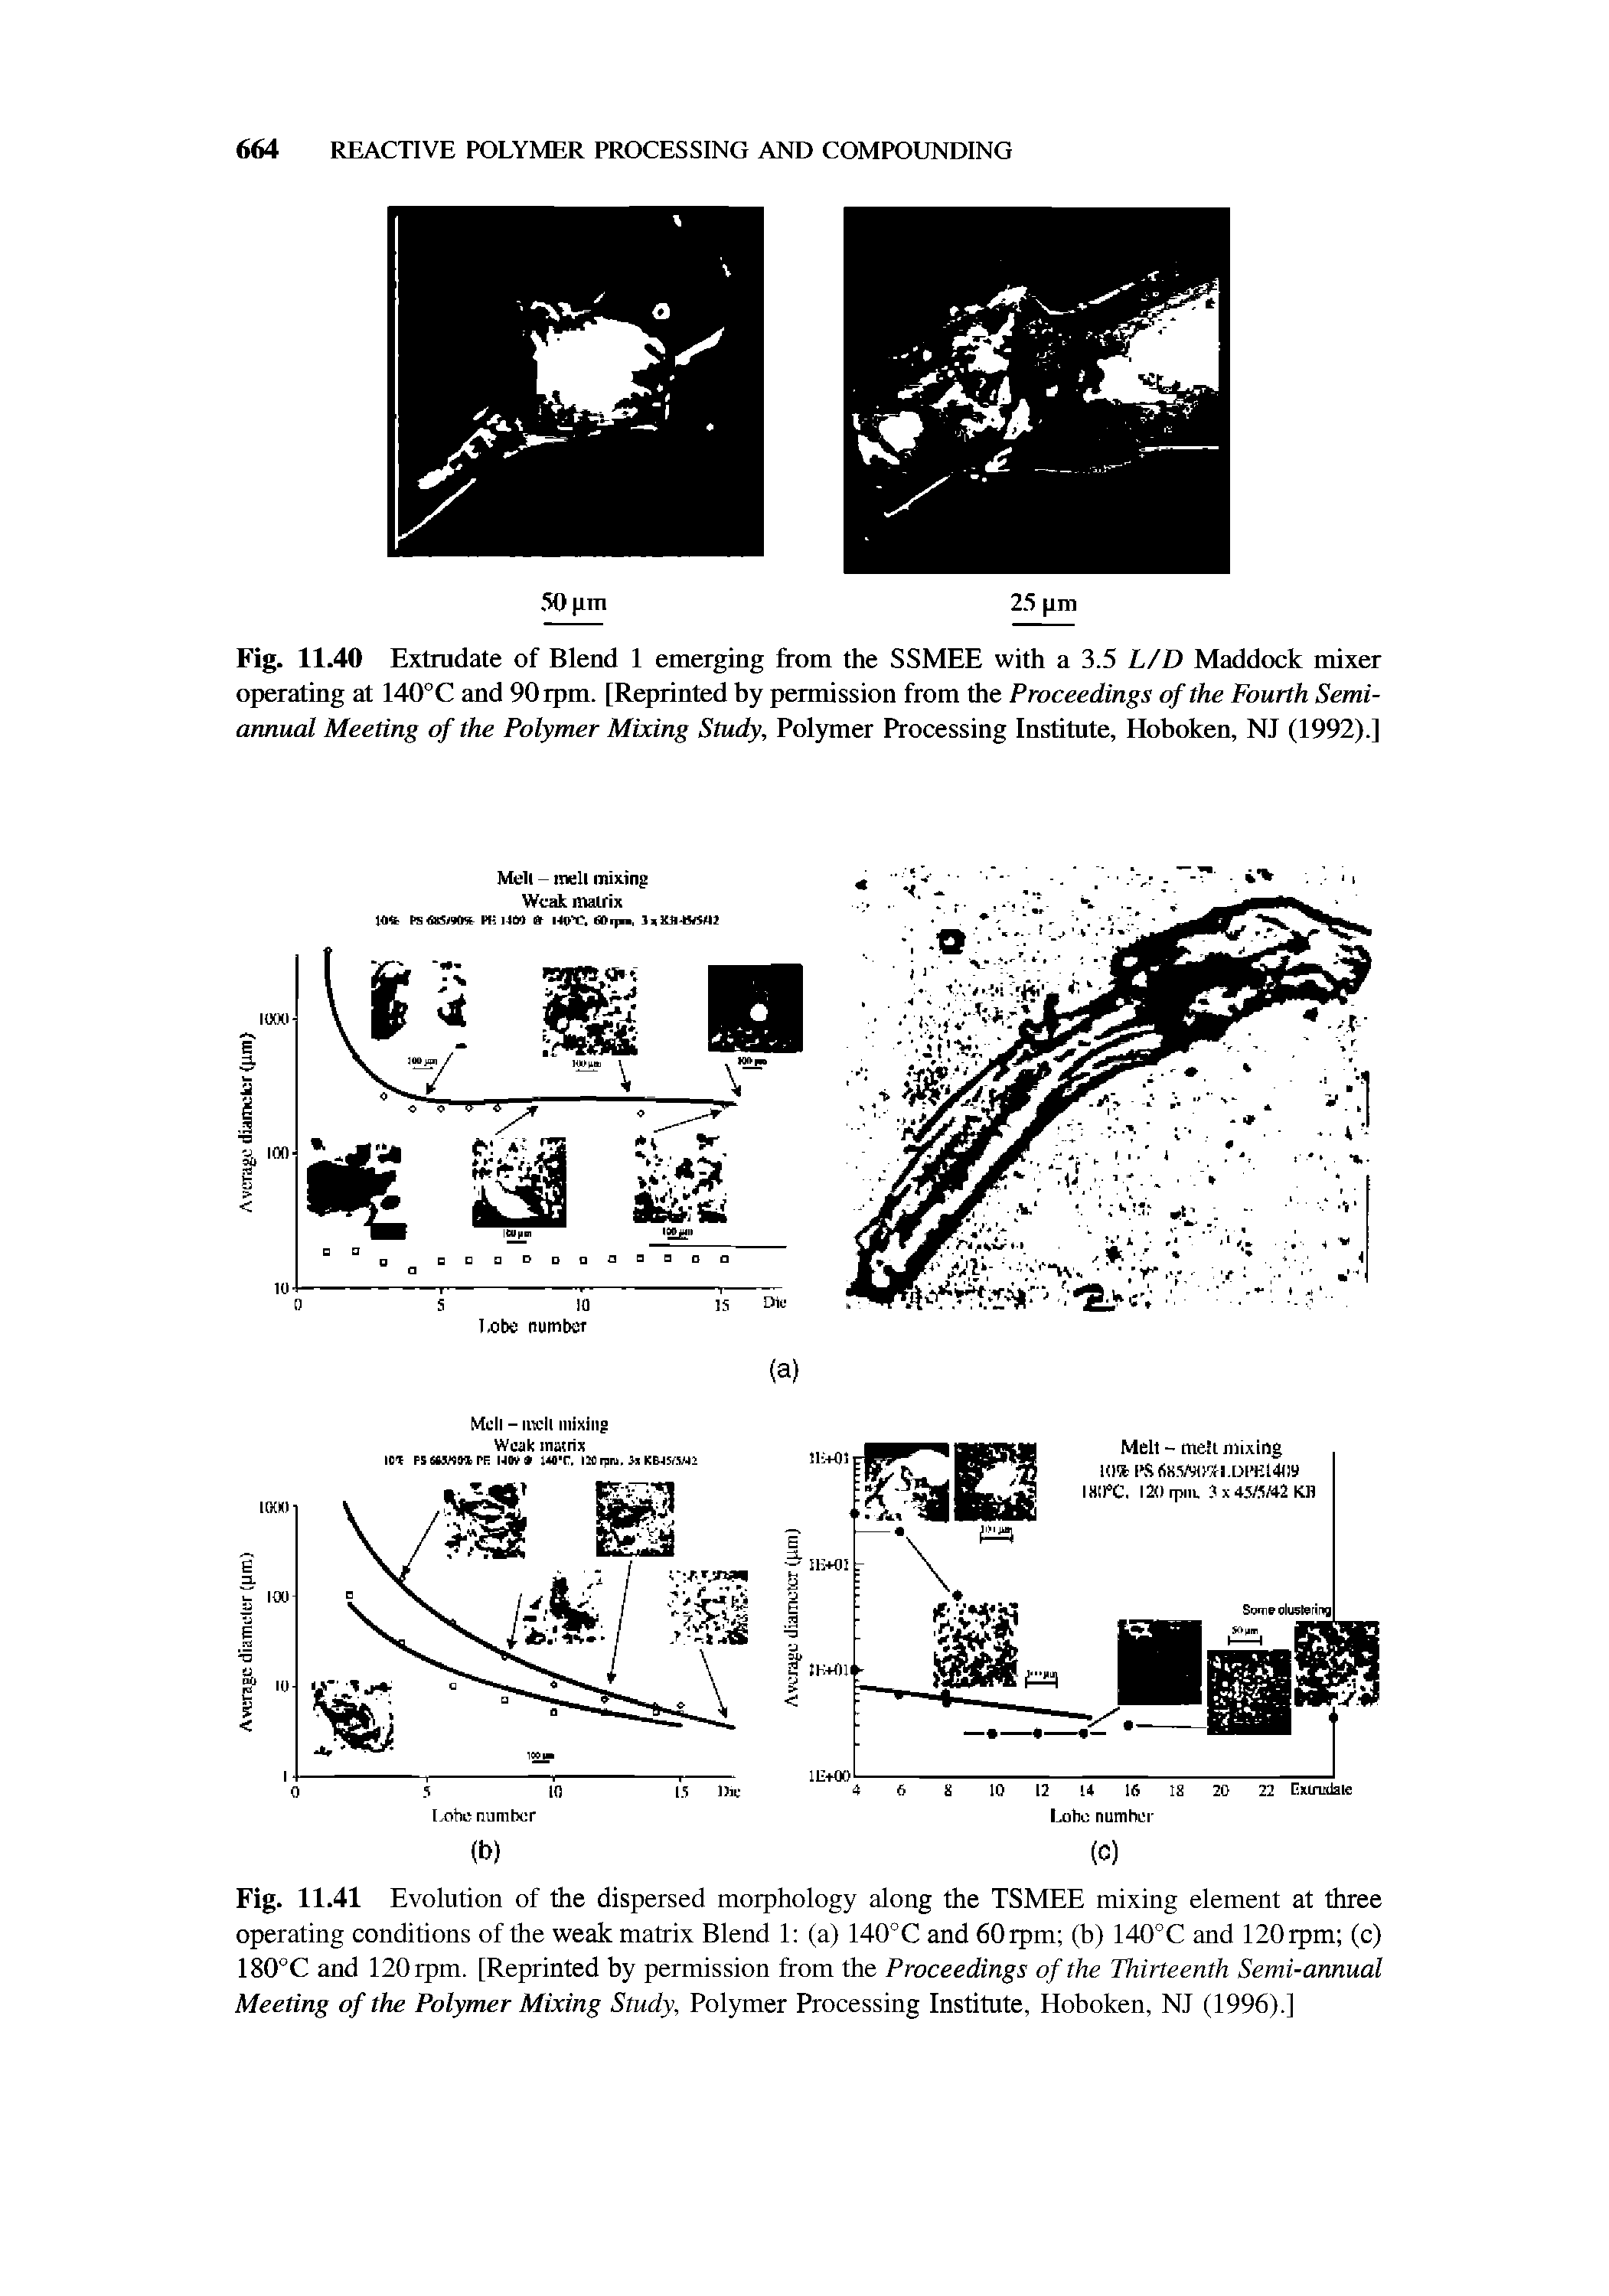 Fig. 11.40 Extmdate of Blend 1 emerging from the SSMEE with a 3.5 L/D Maddock mixer operating at 140°C and 90rpm. [Reprinted hy permission from the Proceedings of the Fourth Semiannual Meeting of the Polymer Mixing Study, Polymer Processing Institute, Hohoken, NJ (1992).]...